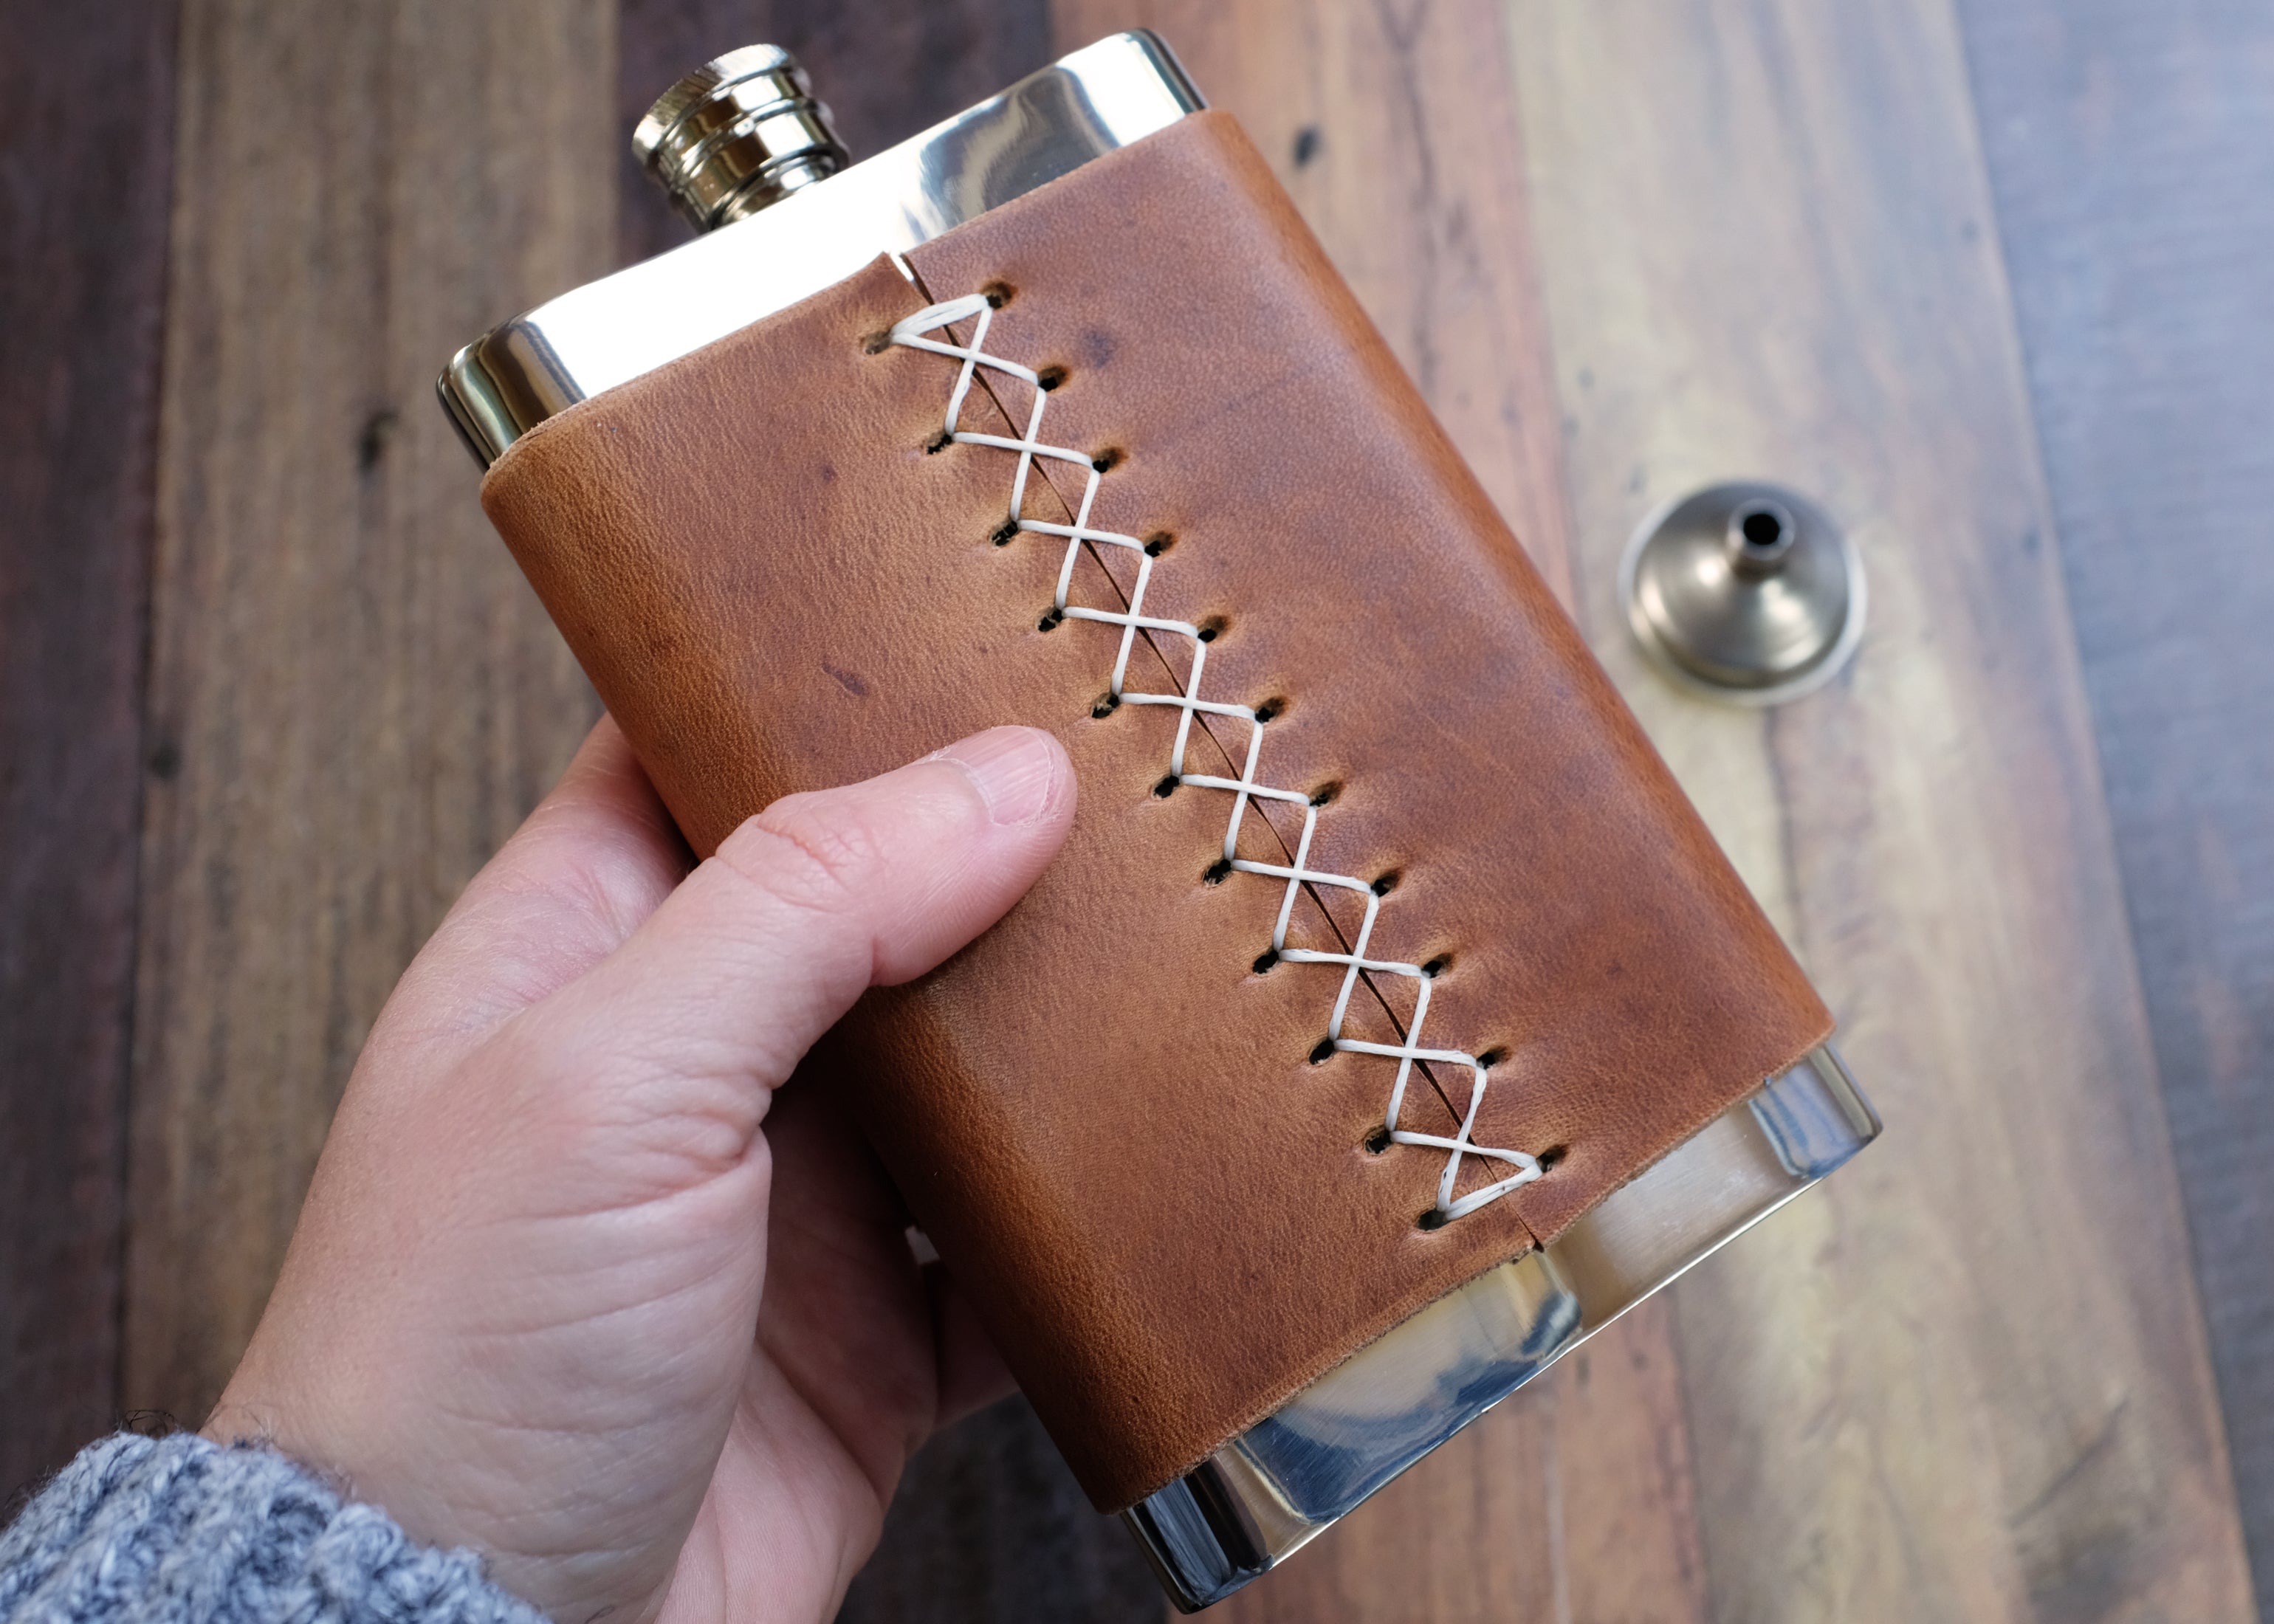 Leather Wrapped 8oz Pewter Hip Flask